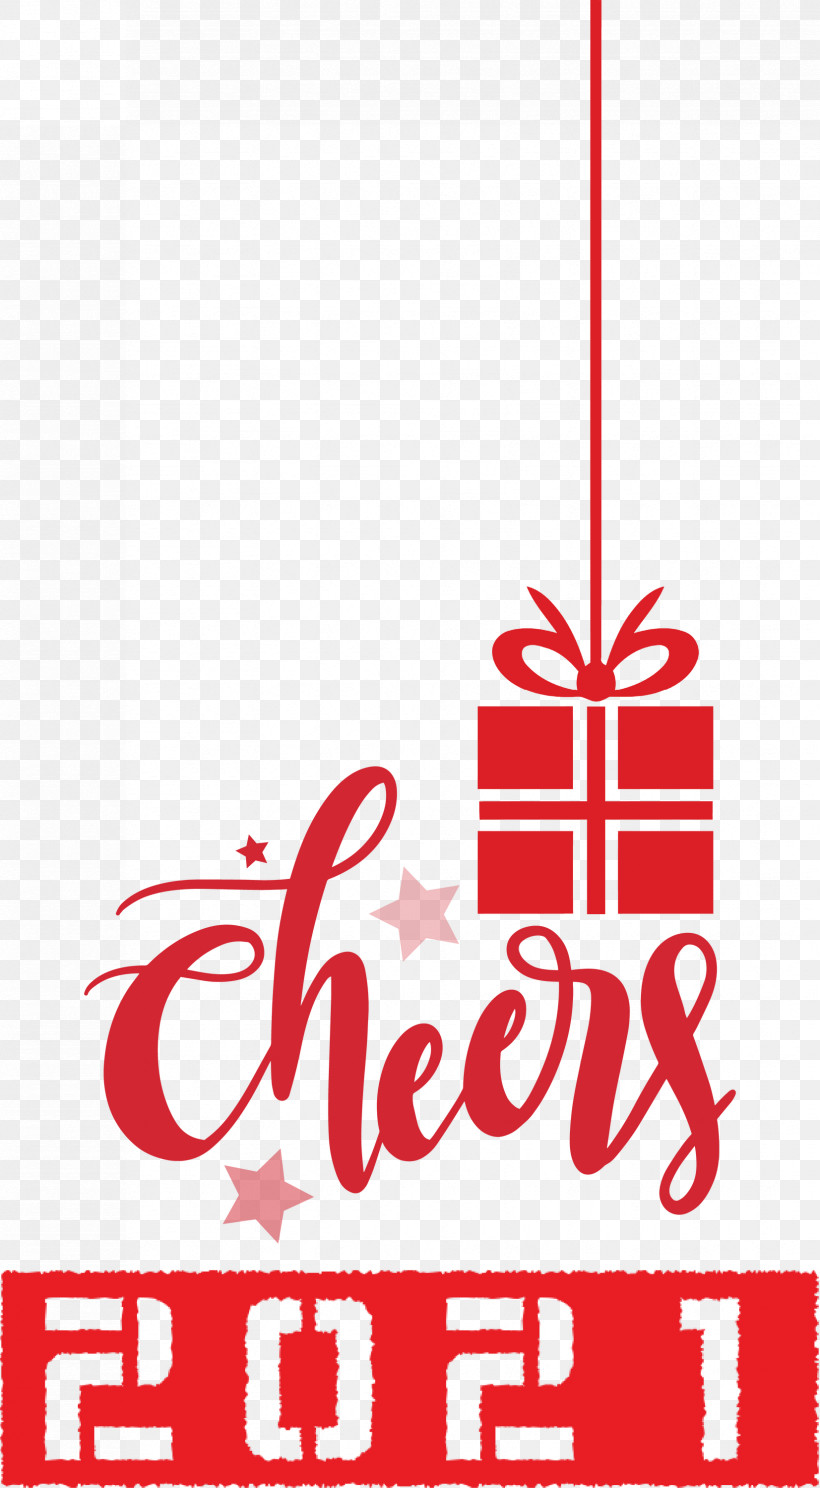 Cheers 2021 New Year Cheers.2021 New Year, PNG, 1653x3000px, Cheers 2021 New Year, Cheers, Free, Logo, Silhouette Download Free